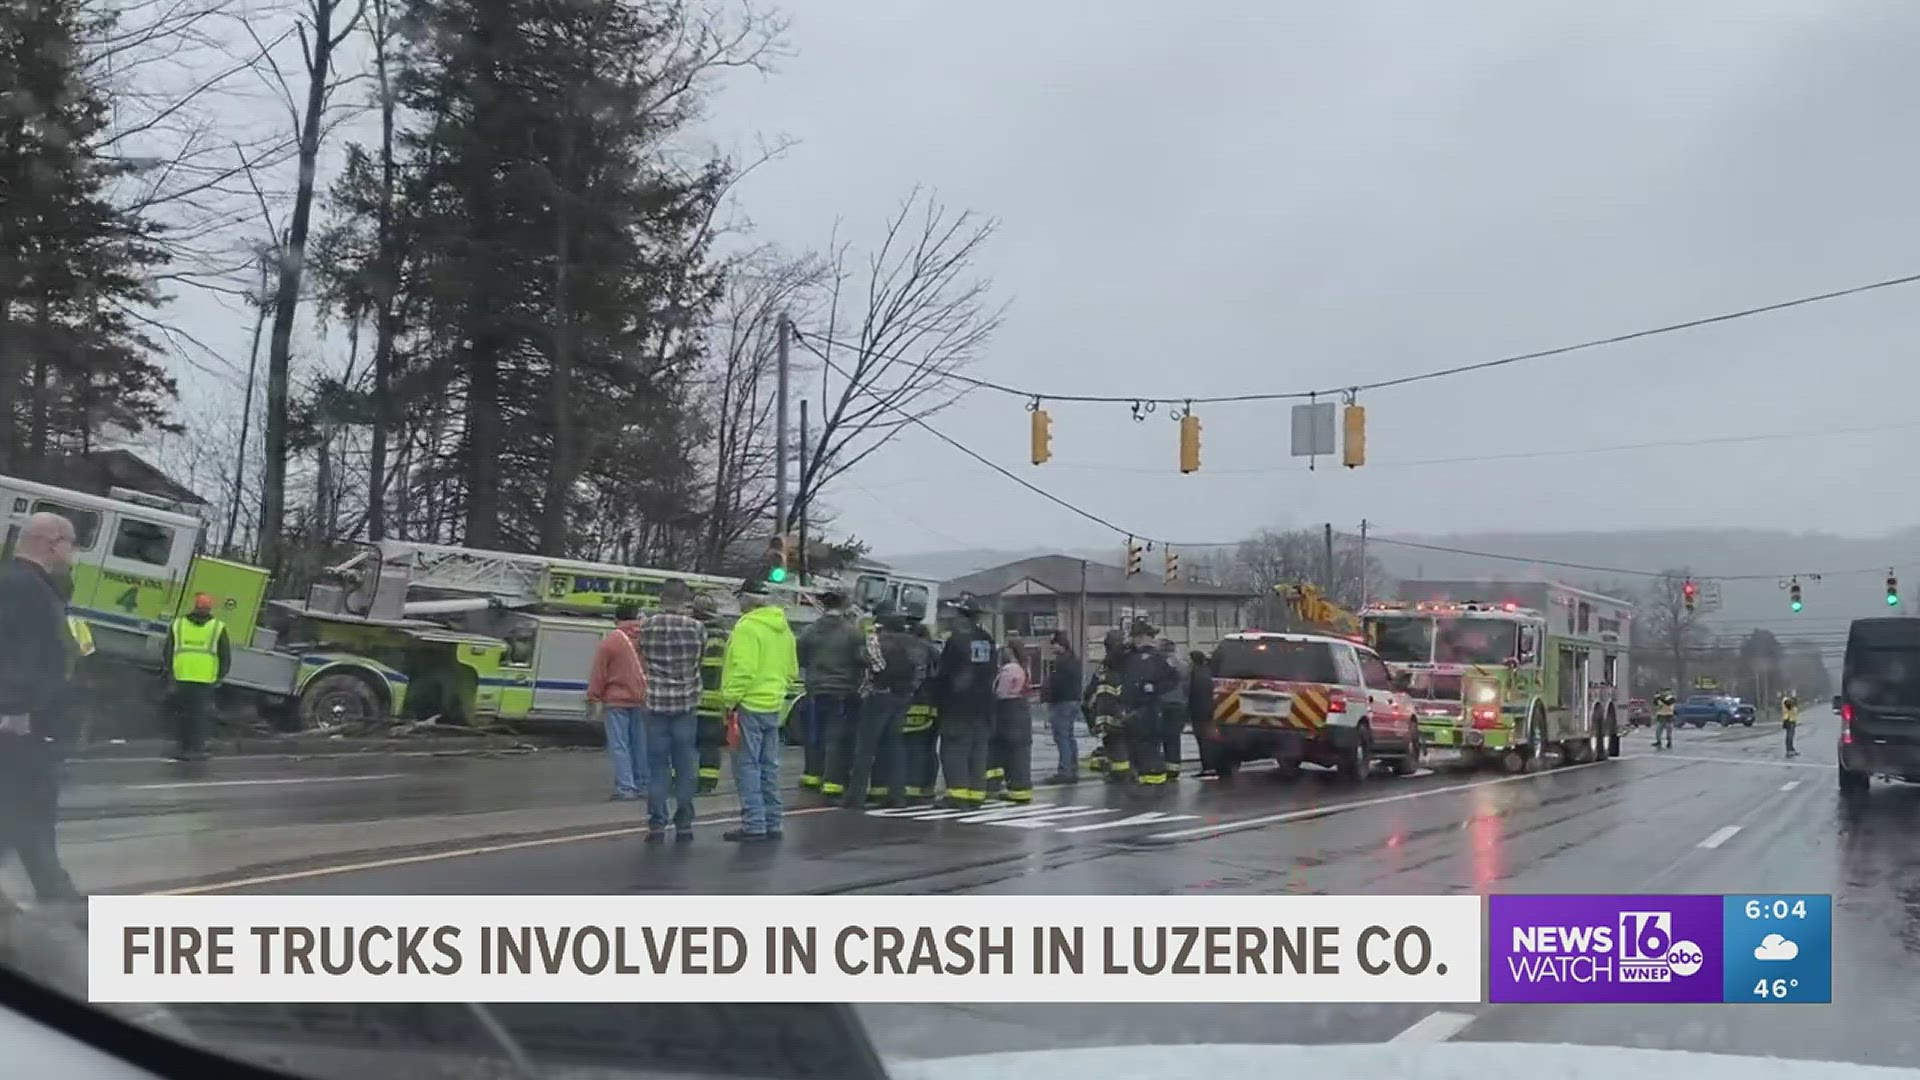 Two fire trucks collided on Saturday afternoon on the way to a call in Luzerne County.